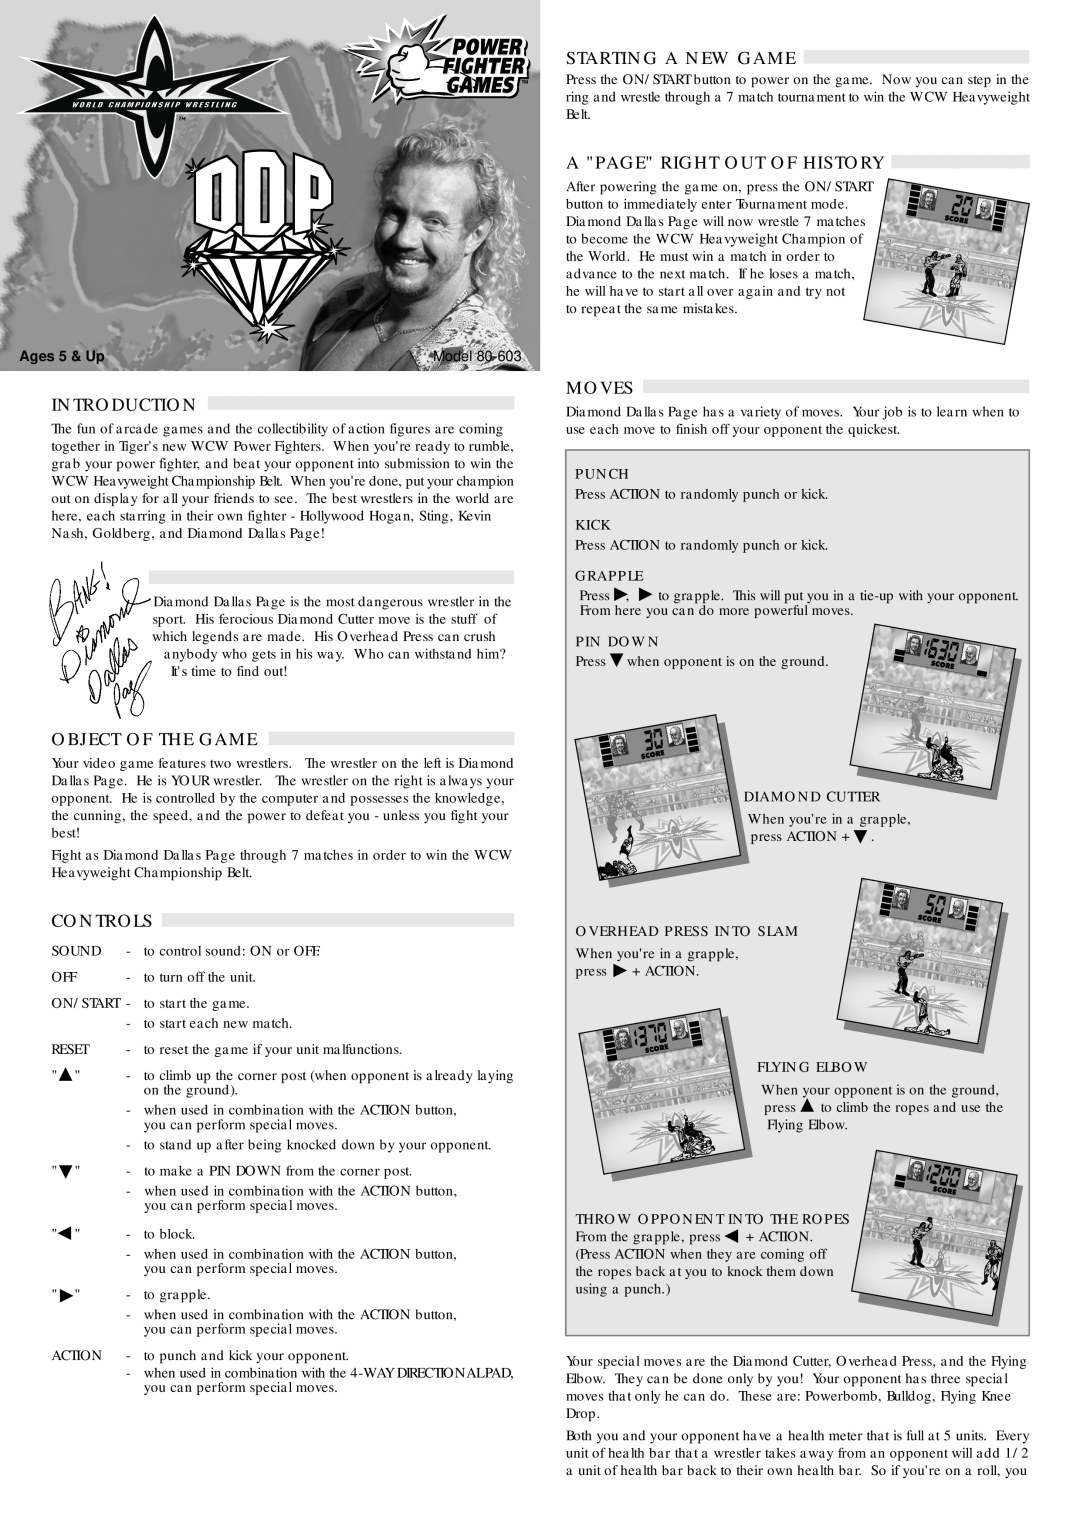 Hasbro 80-603 manual Introduction, Object Of The Game, Controls, Starting A New Game, A Page Right Out Of History, Moves 